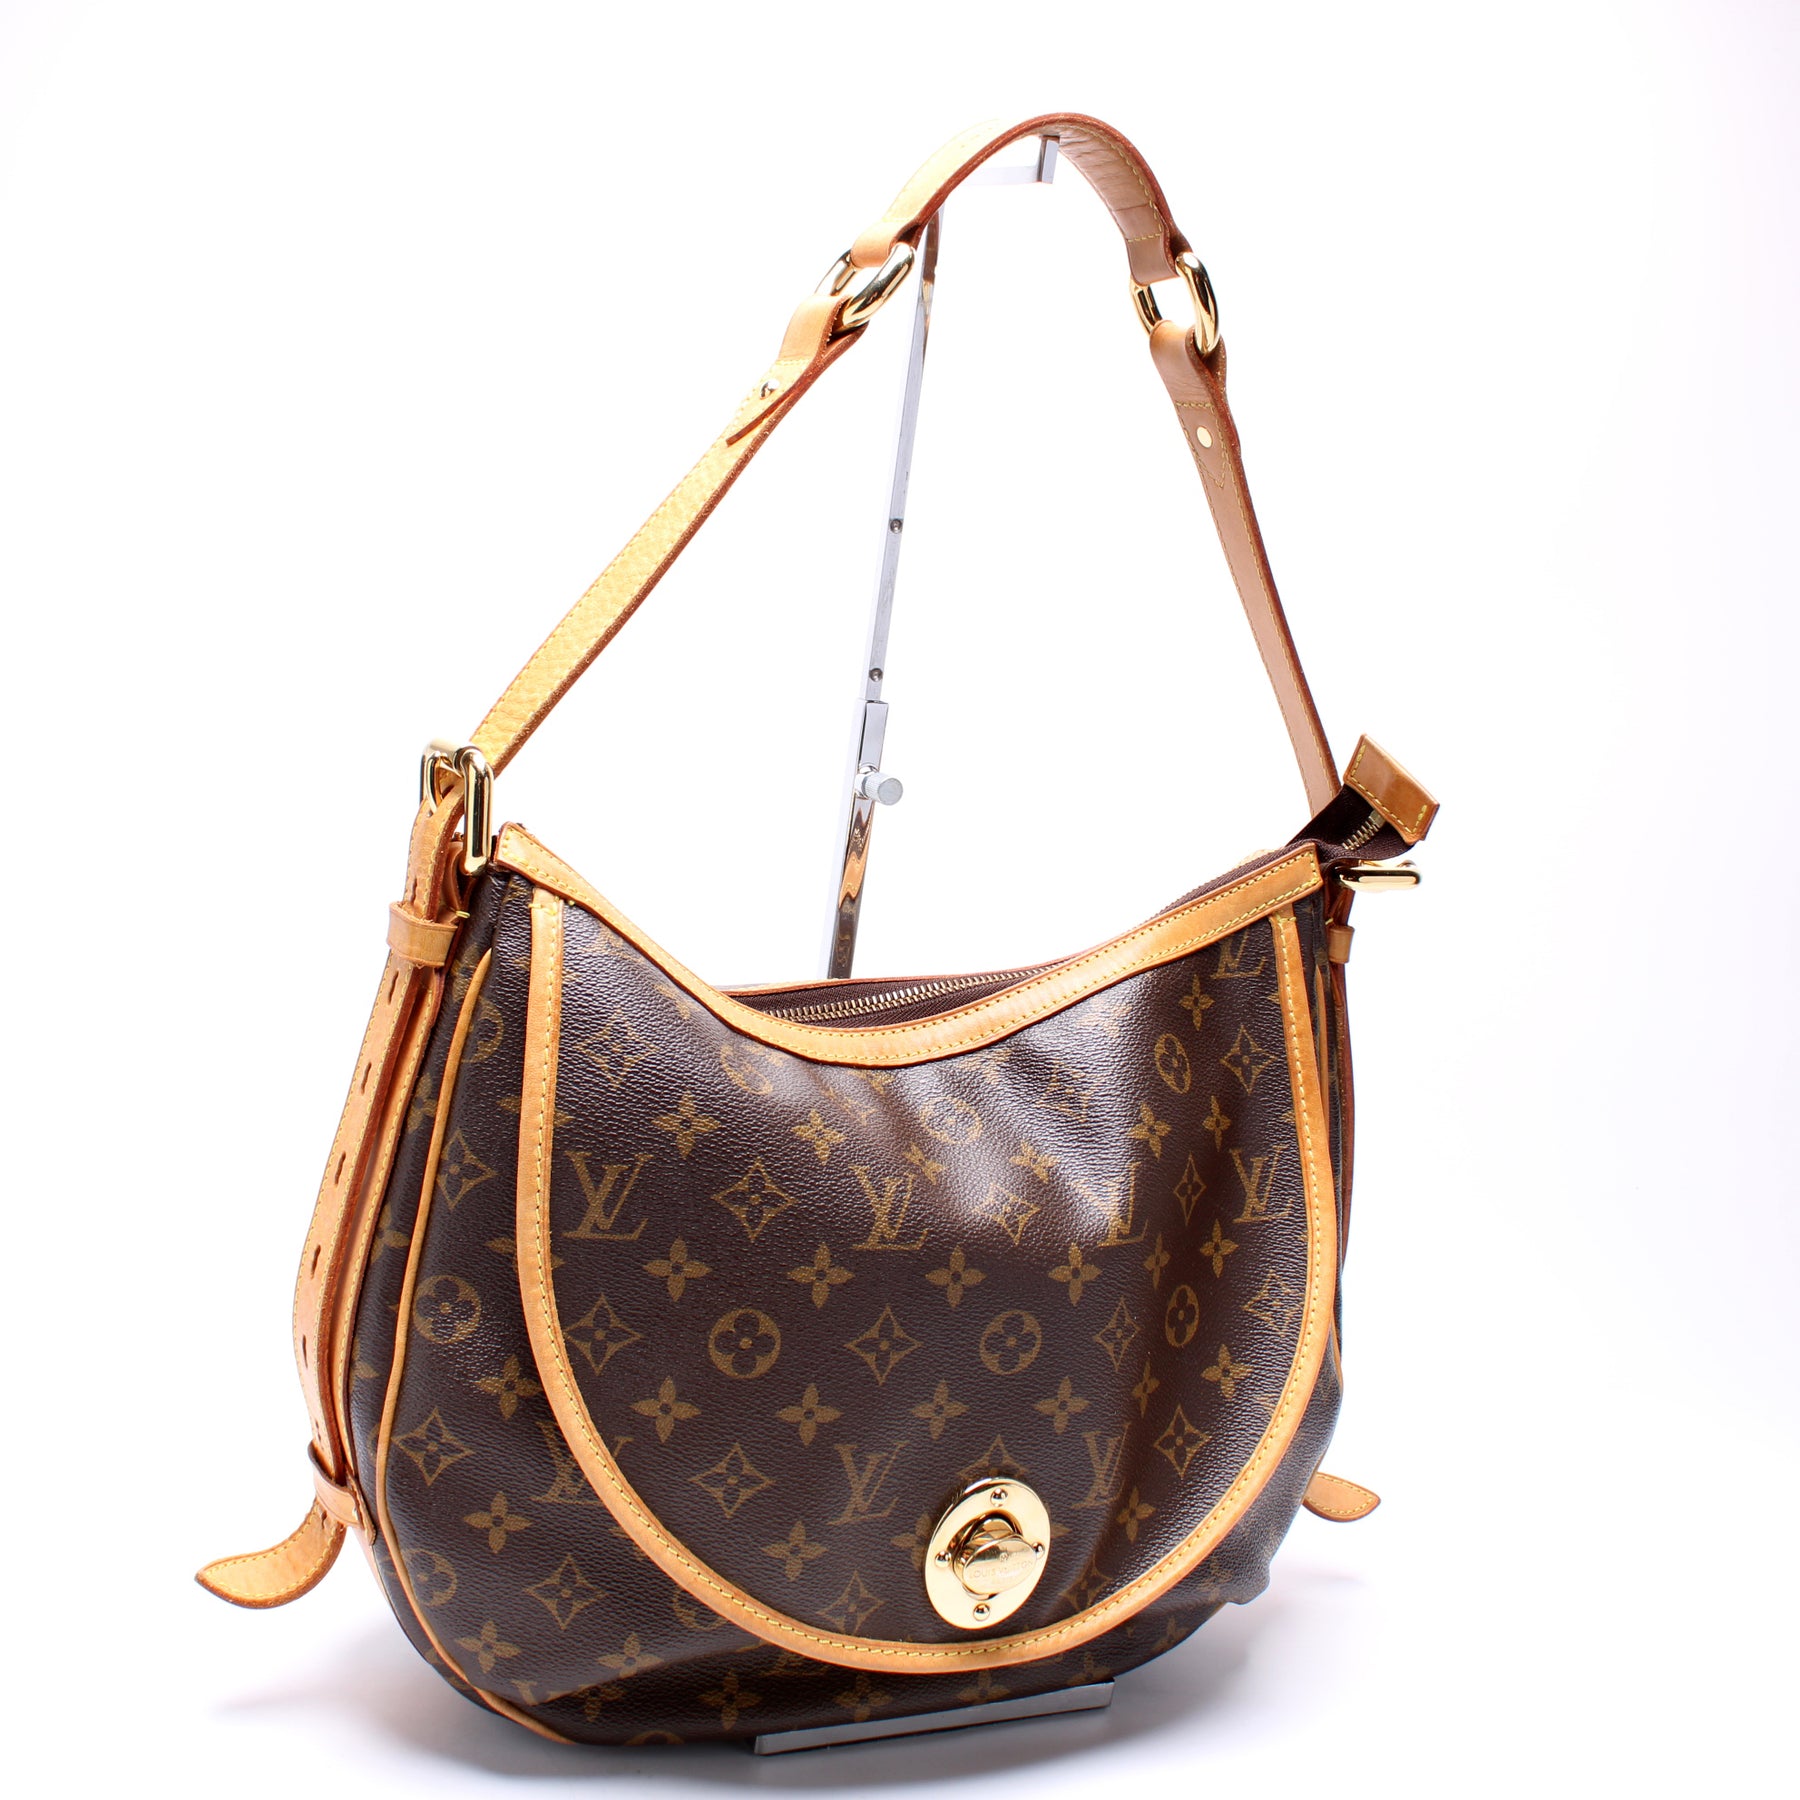 Louis Vuitton - Authenticated Tulum Handbag - Leather Brown for Women, Very Good Condition